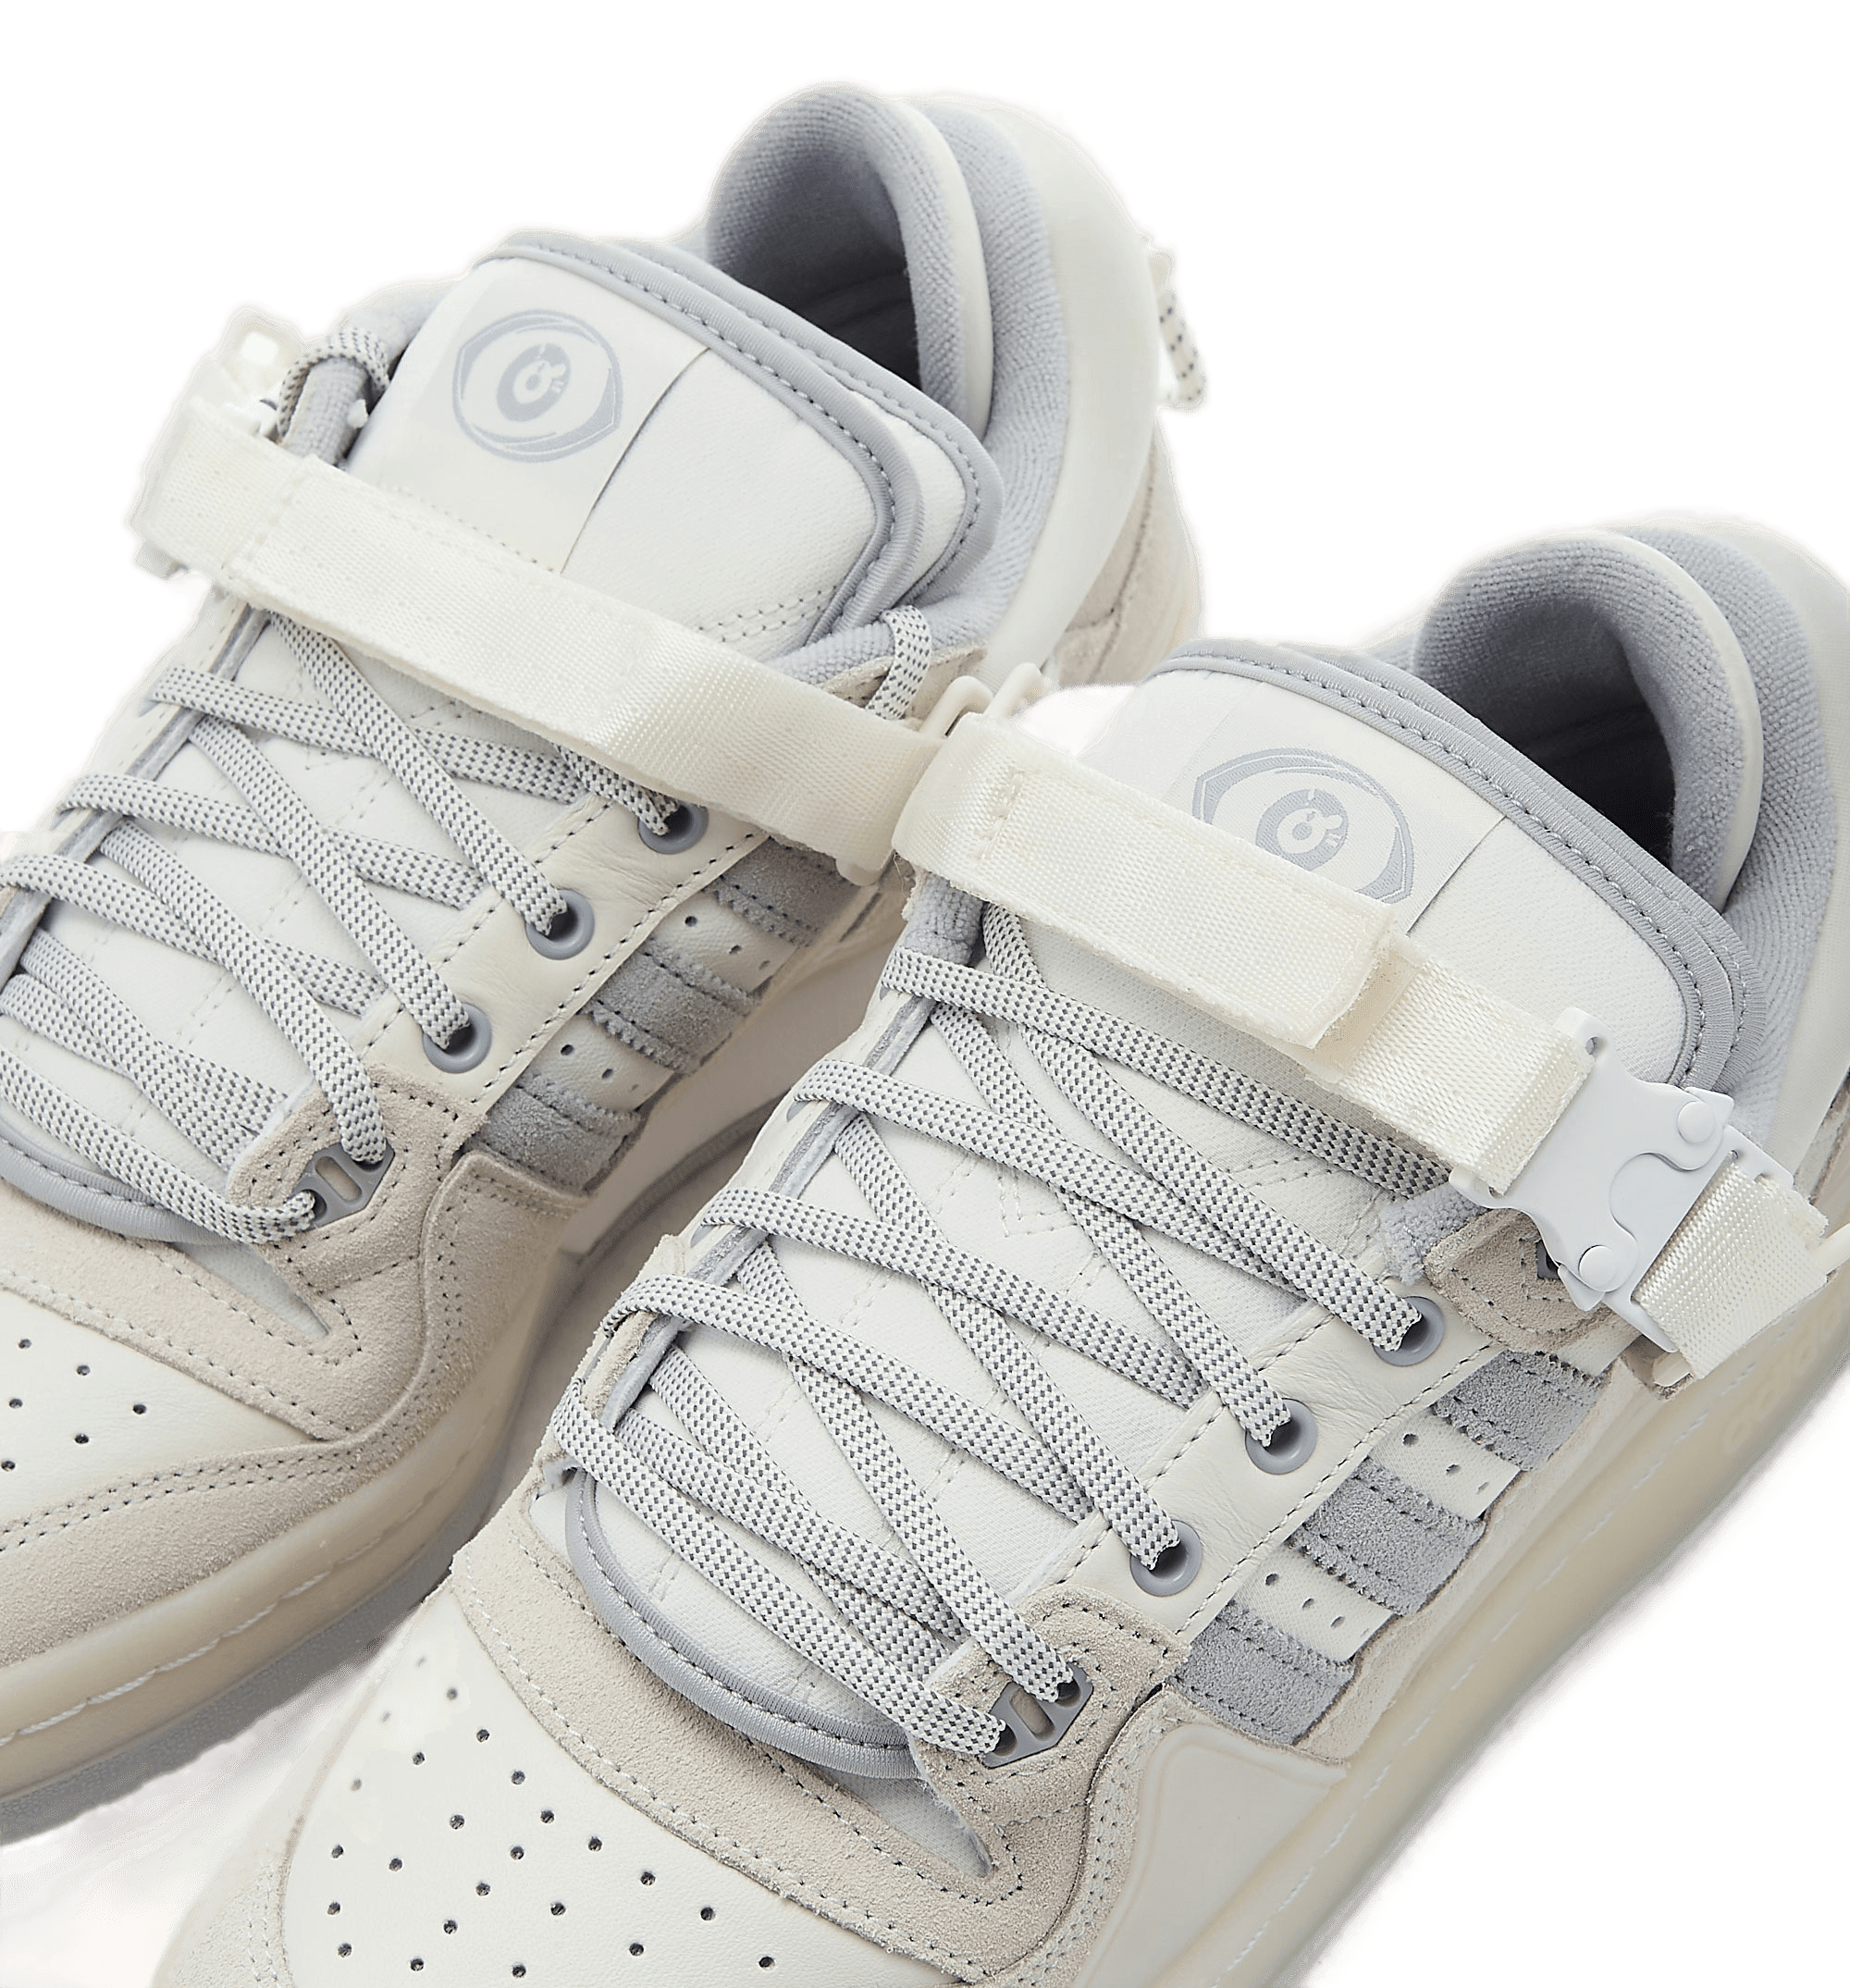 Adidas Forum x – SneakCenter White Cloud Bunny Low Bad